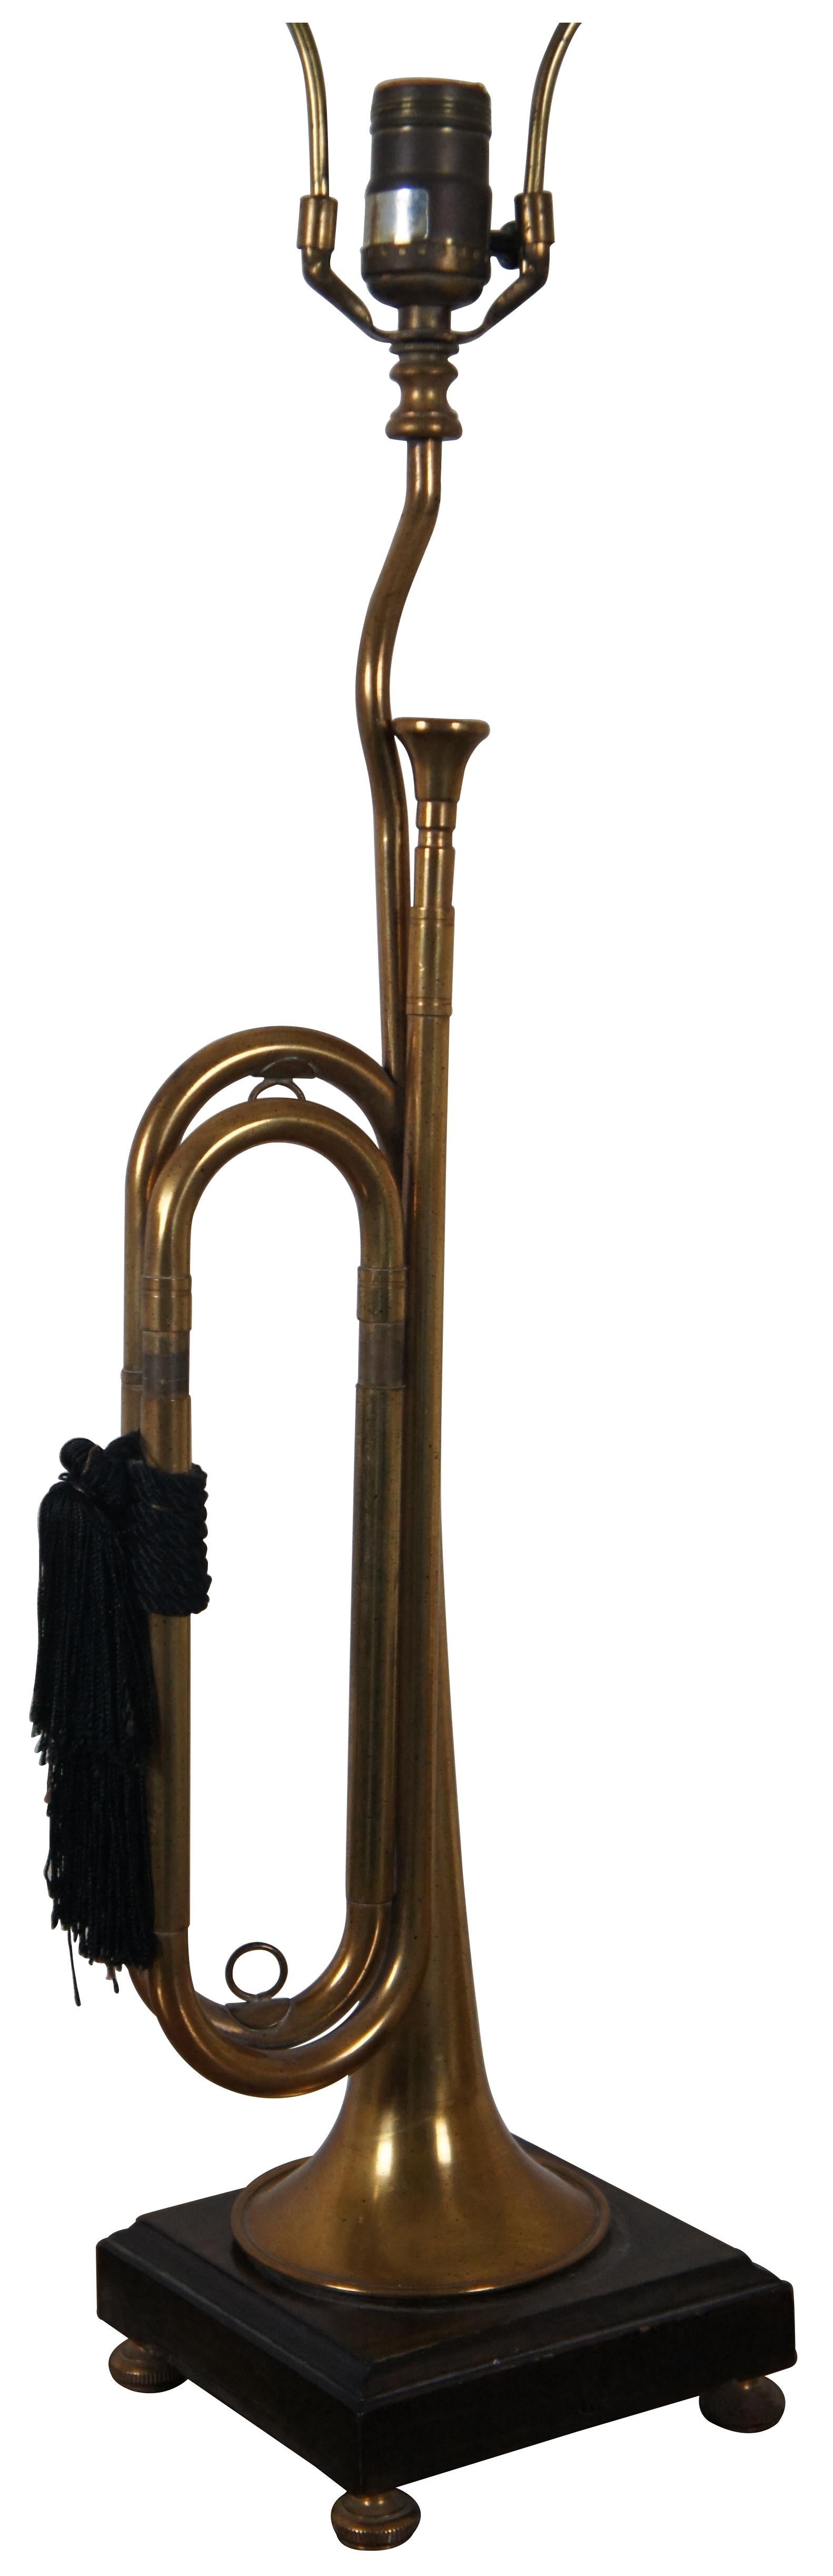 Vintage Frederick Cooper brass instrument table lamp in the shape of a bugle decorated with black tassels, standing on a dark wood base, with a ring shaped finial.

6.5” x 6” x 25.5” / Total Height – 37.5” (Width x Depth x Height)